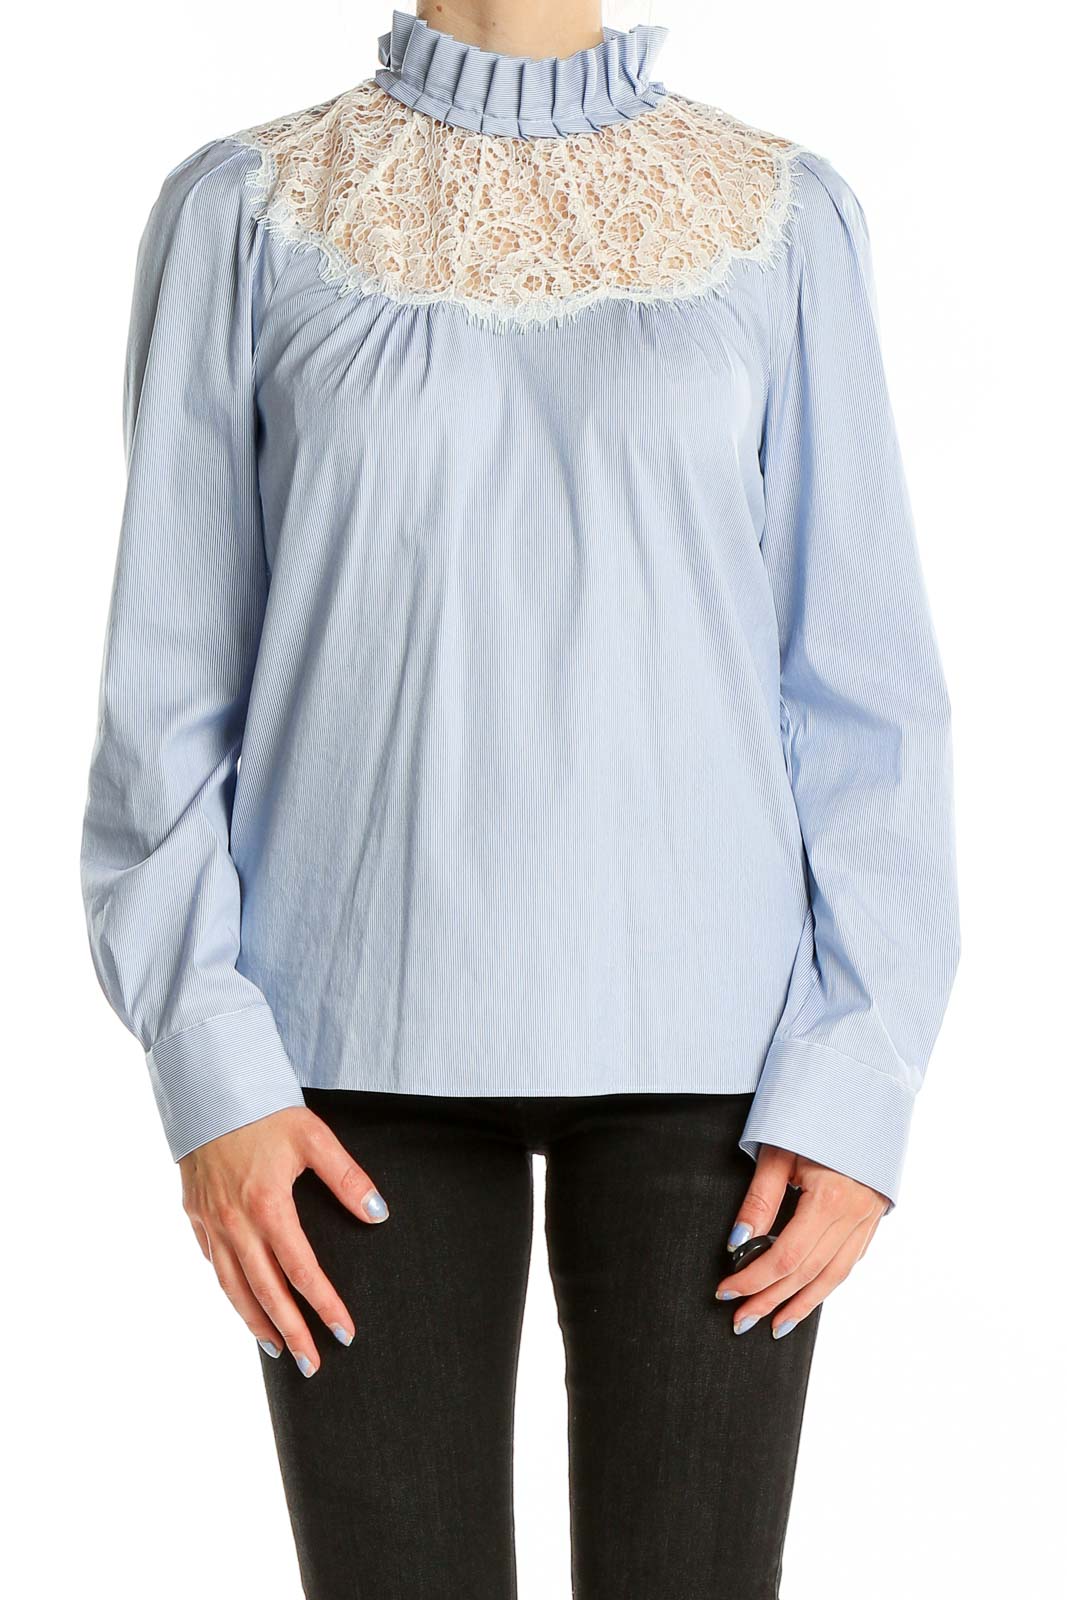 Blue Highneck Long Sleeve Pin Stripe Lace Top Front